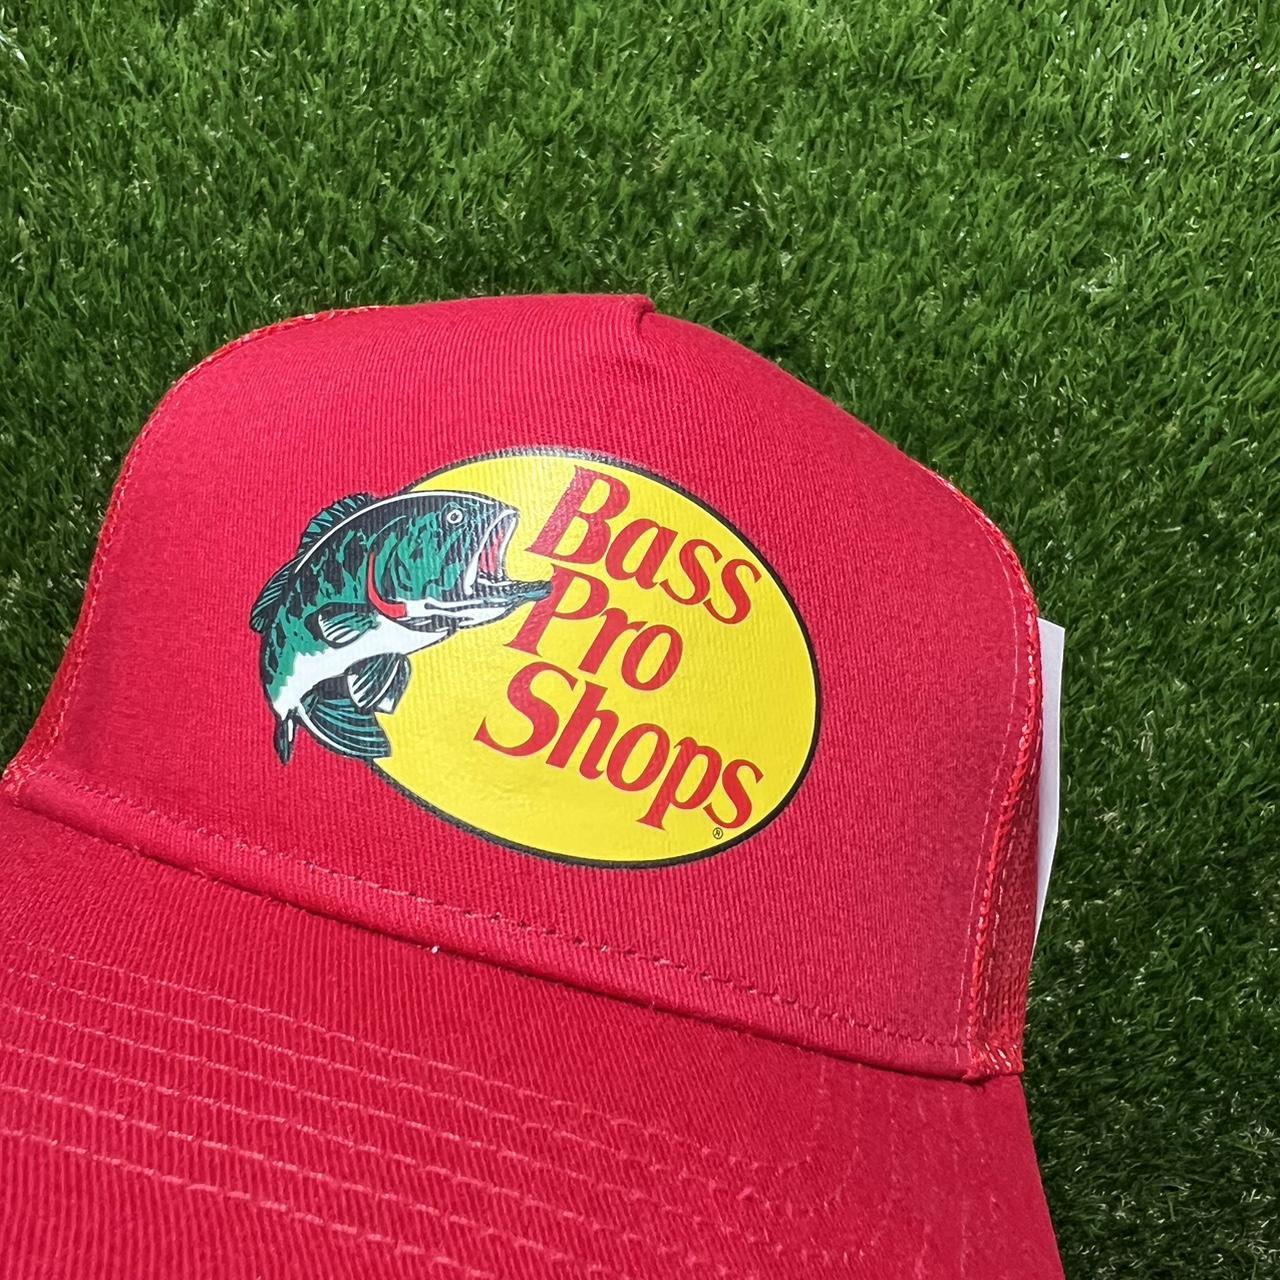 BASS PRO SHOPS Pink Mesh Trucker Hat Size Youth